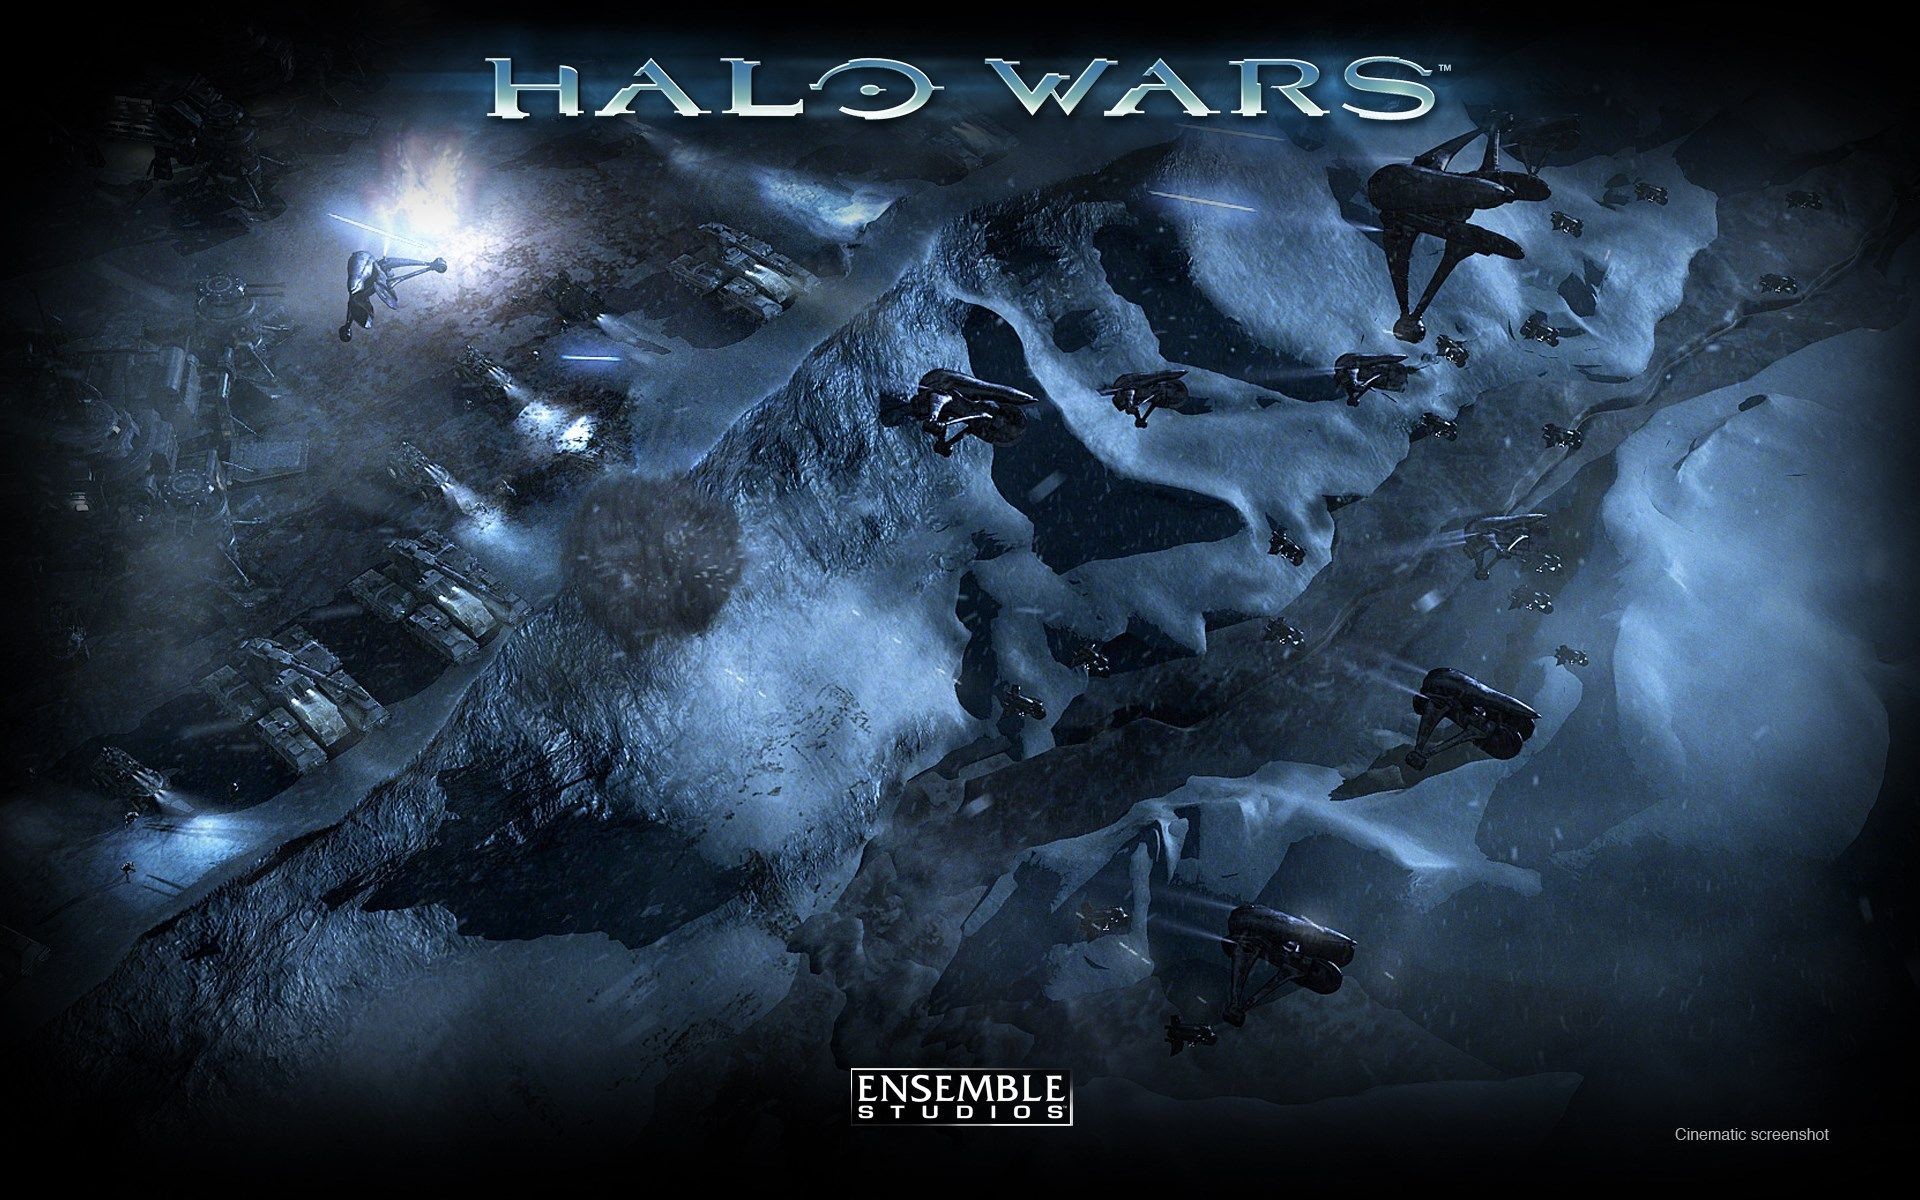 1920x1200  px HD Widescreen Halo Wars wallpaper by Palmiro Little for :  TW.com